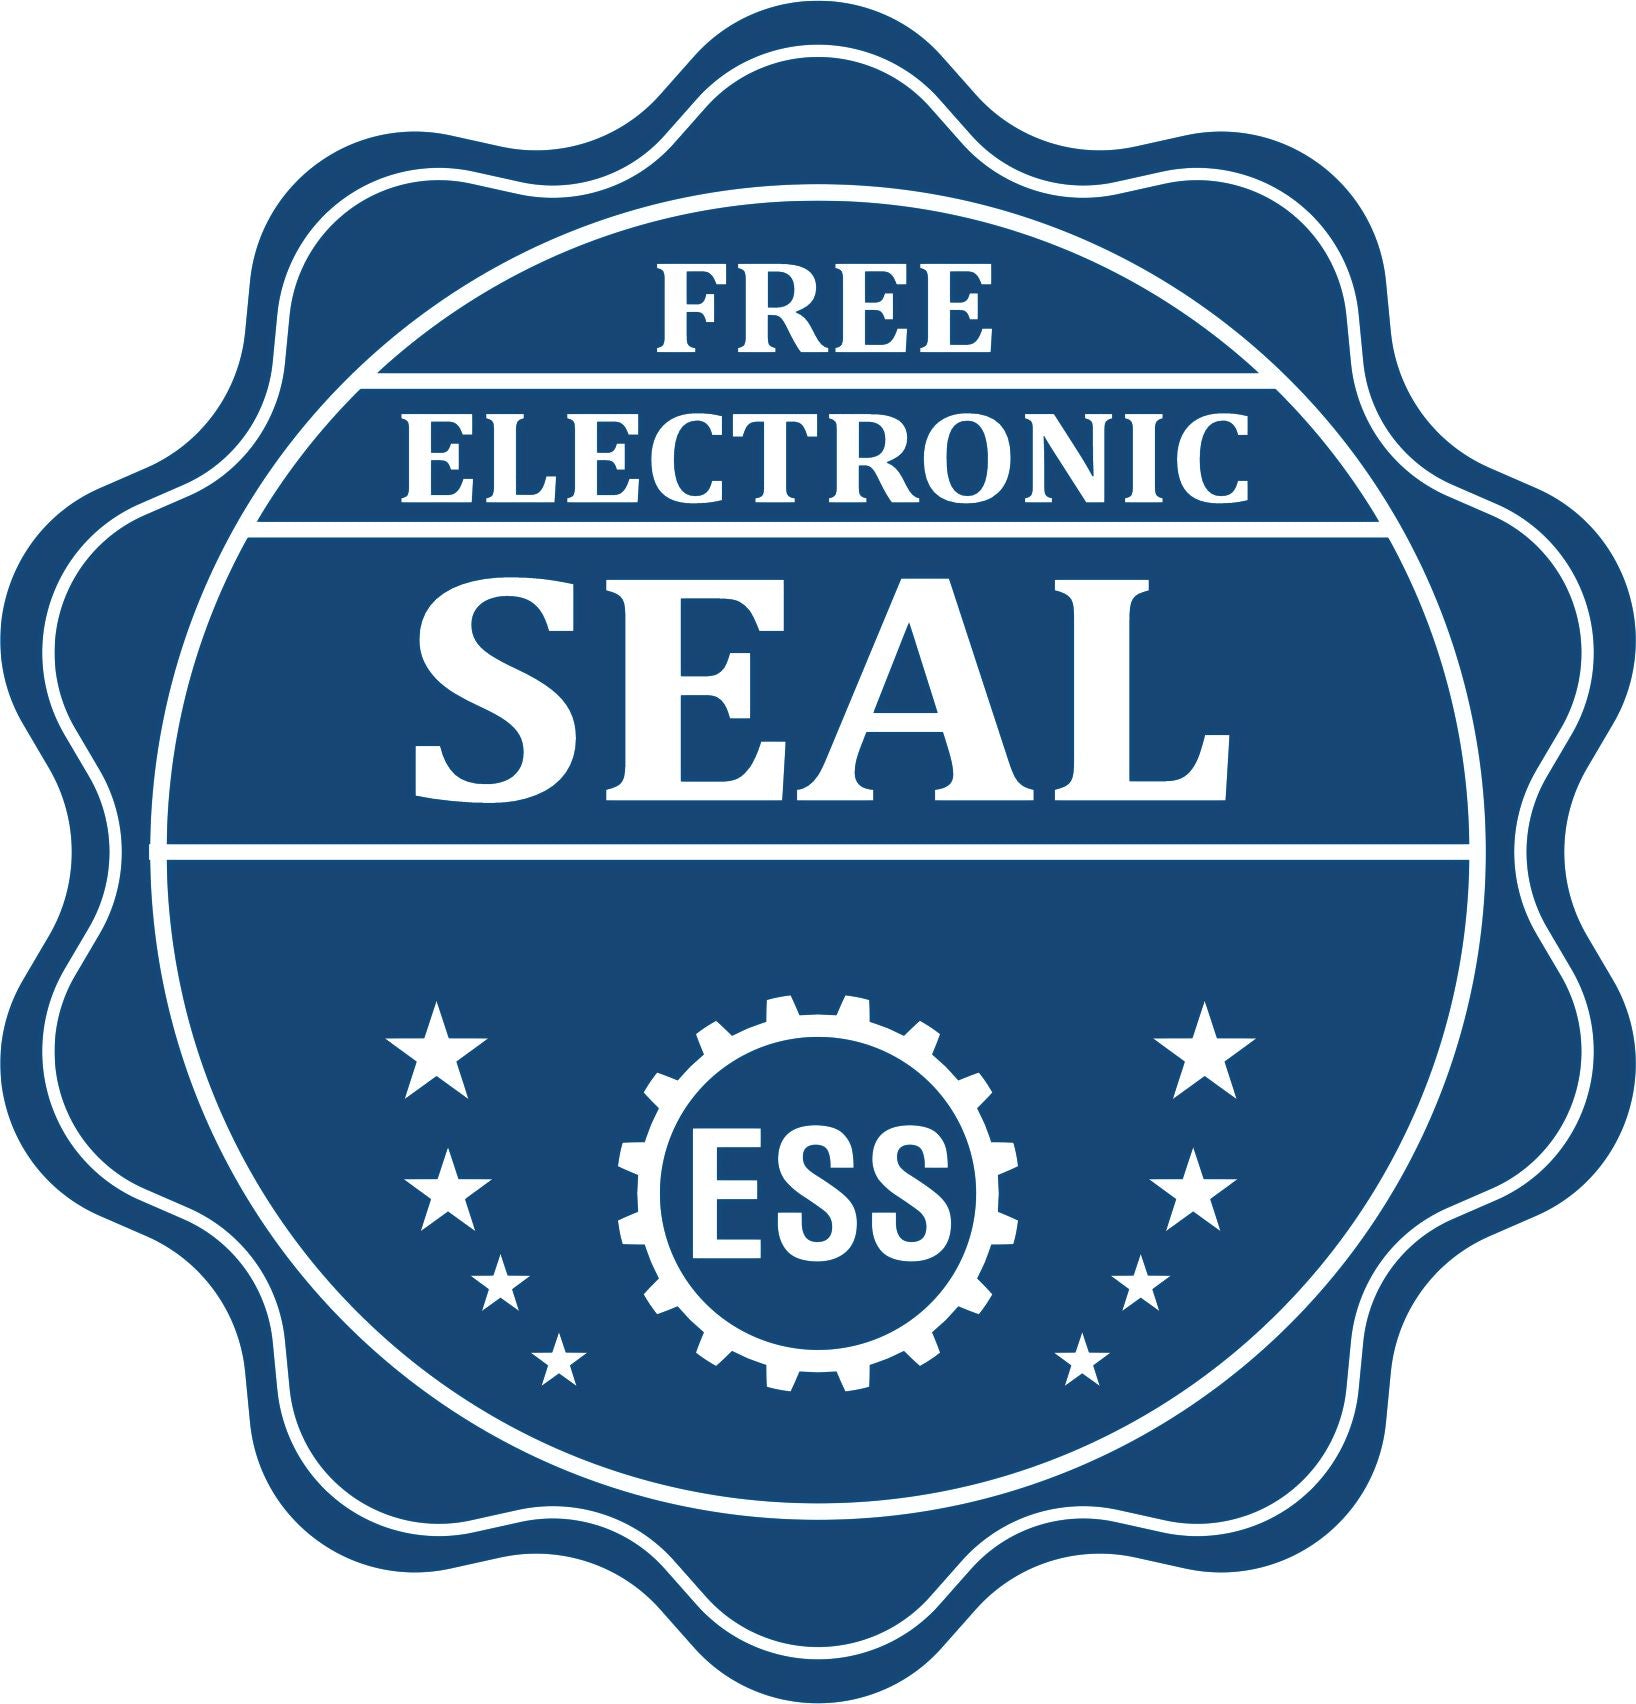 A badge showing a free electronic seal for the Soft Arkansas Professional Engineer Seal with stars and the ESS gear on the emblem.